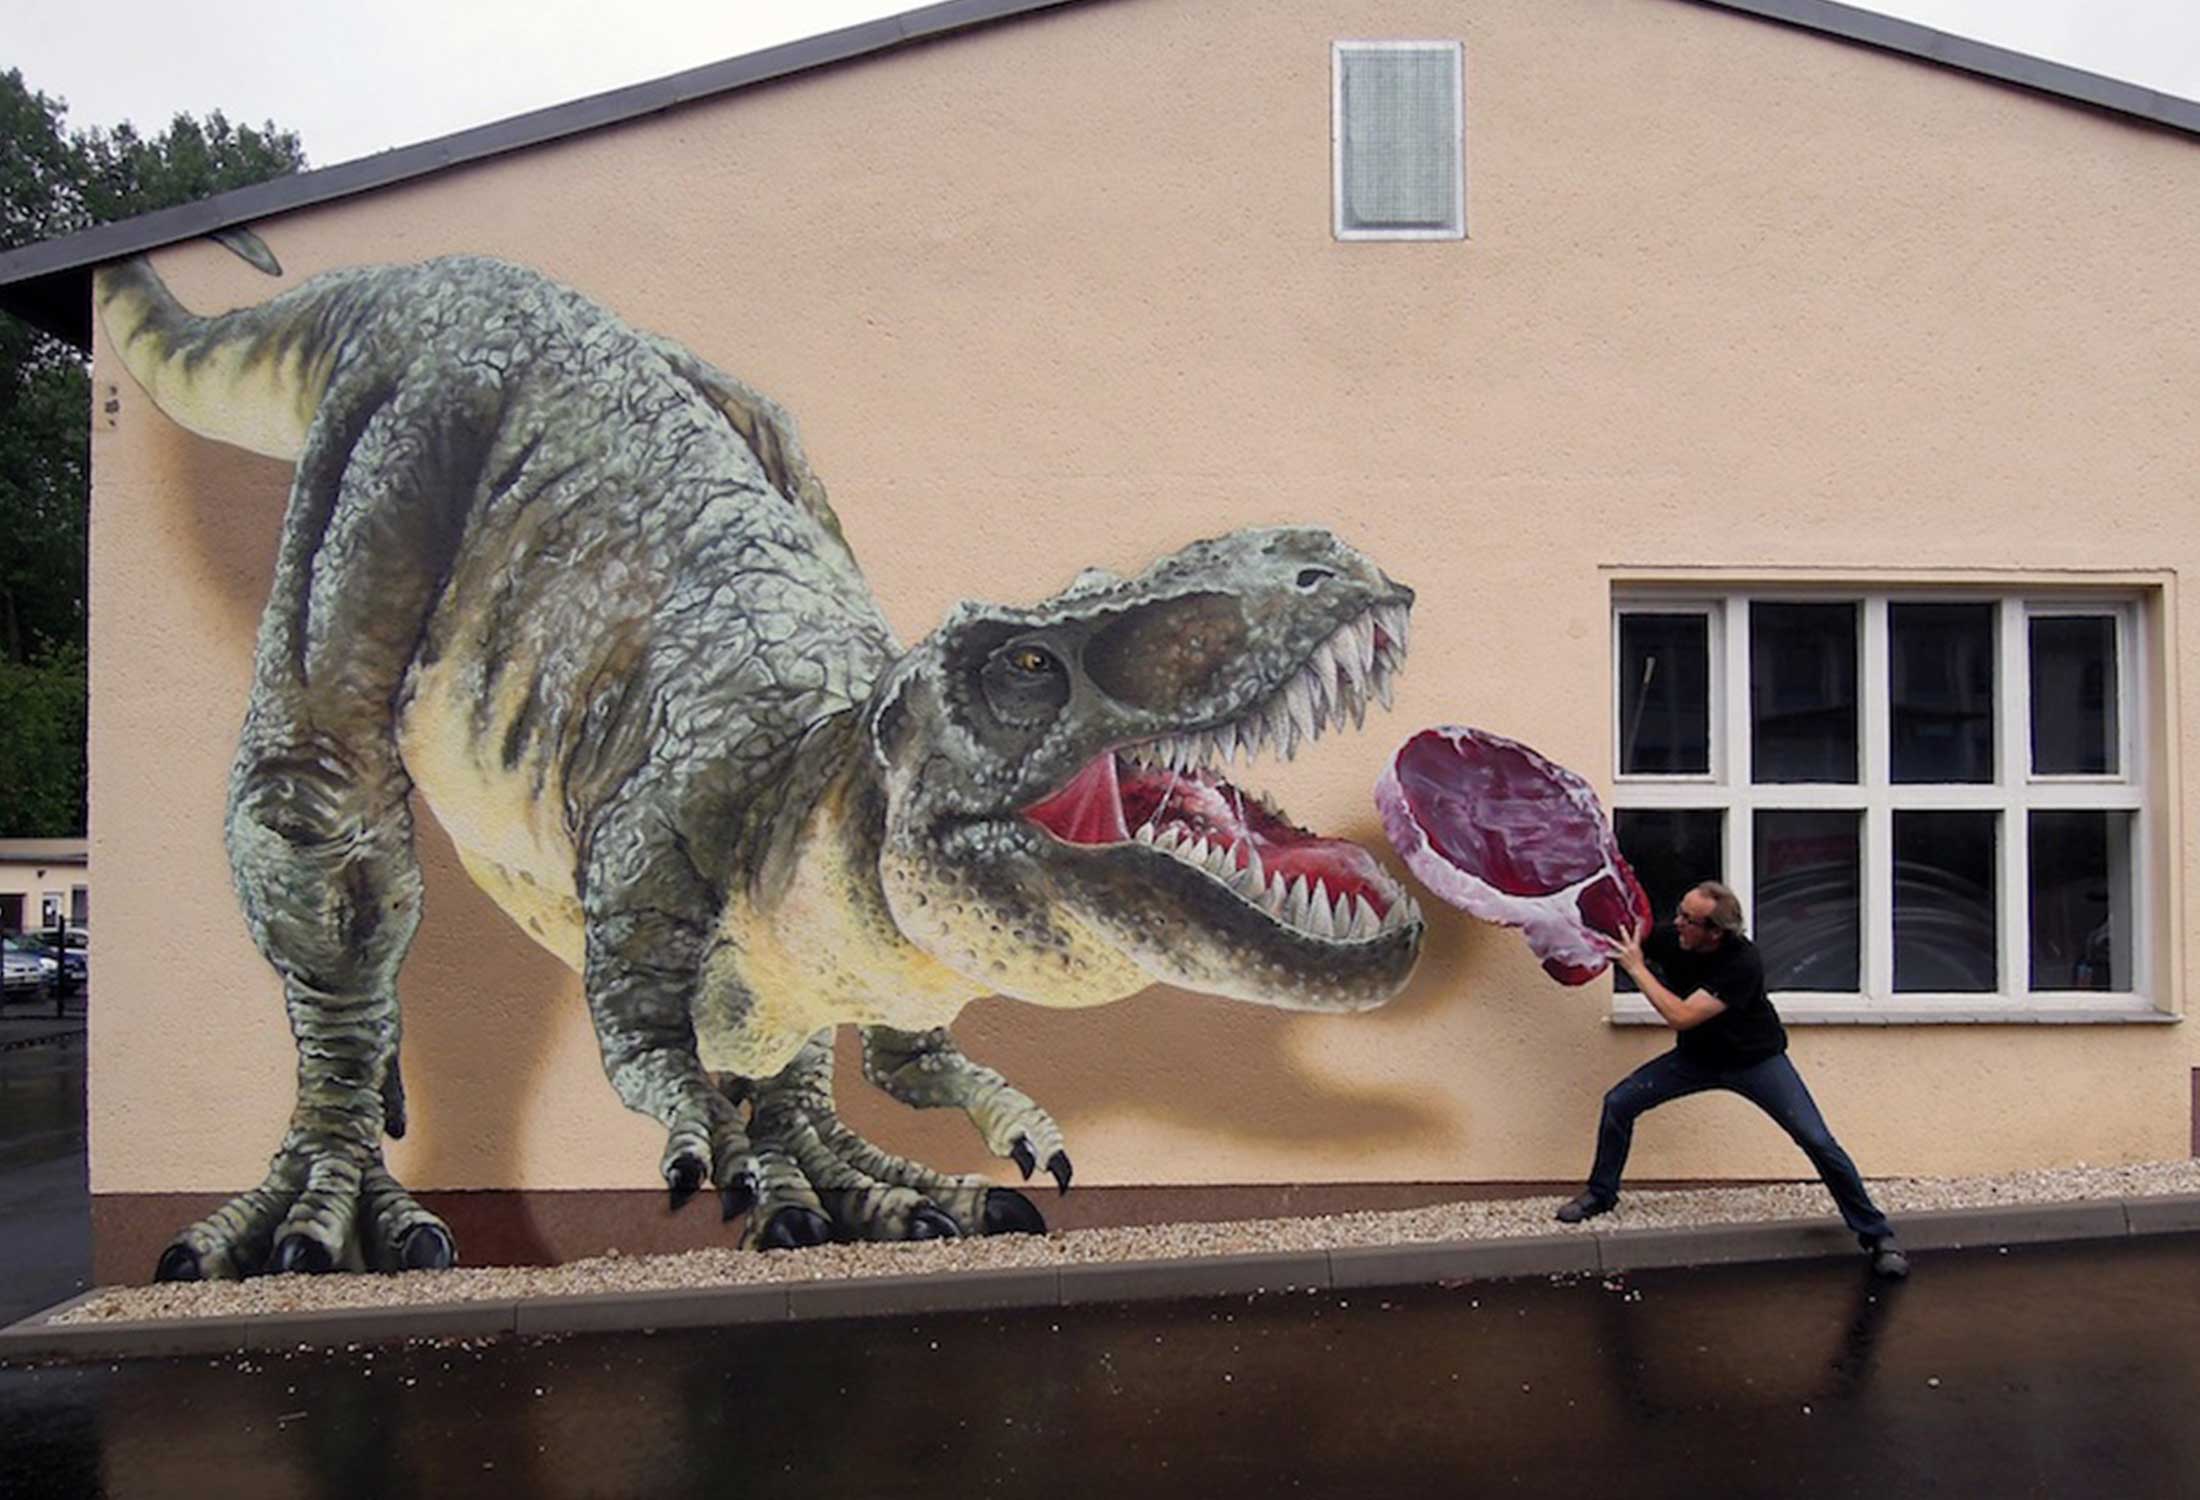 A memorable and magically-realistic mural by Tasso, TASSOsaurus Rex evokes feelings of awe and fear in viewers.